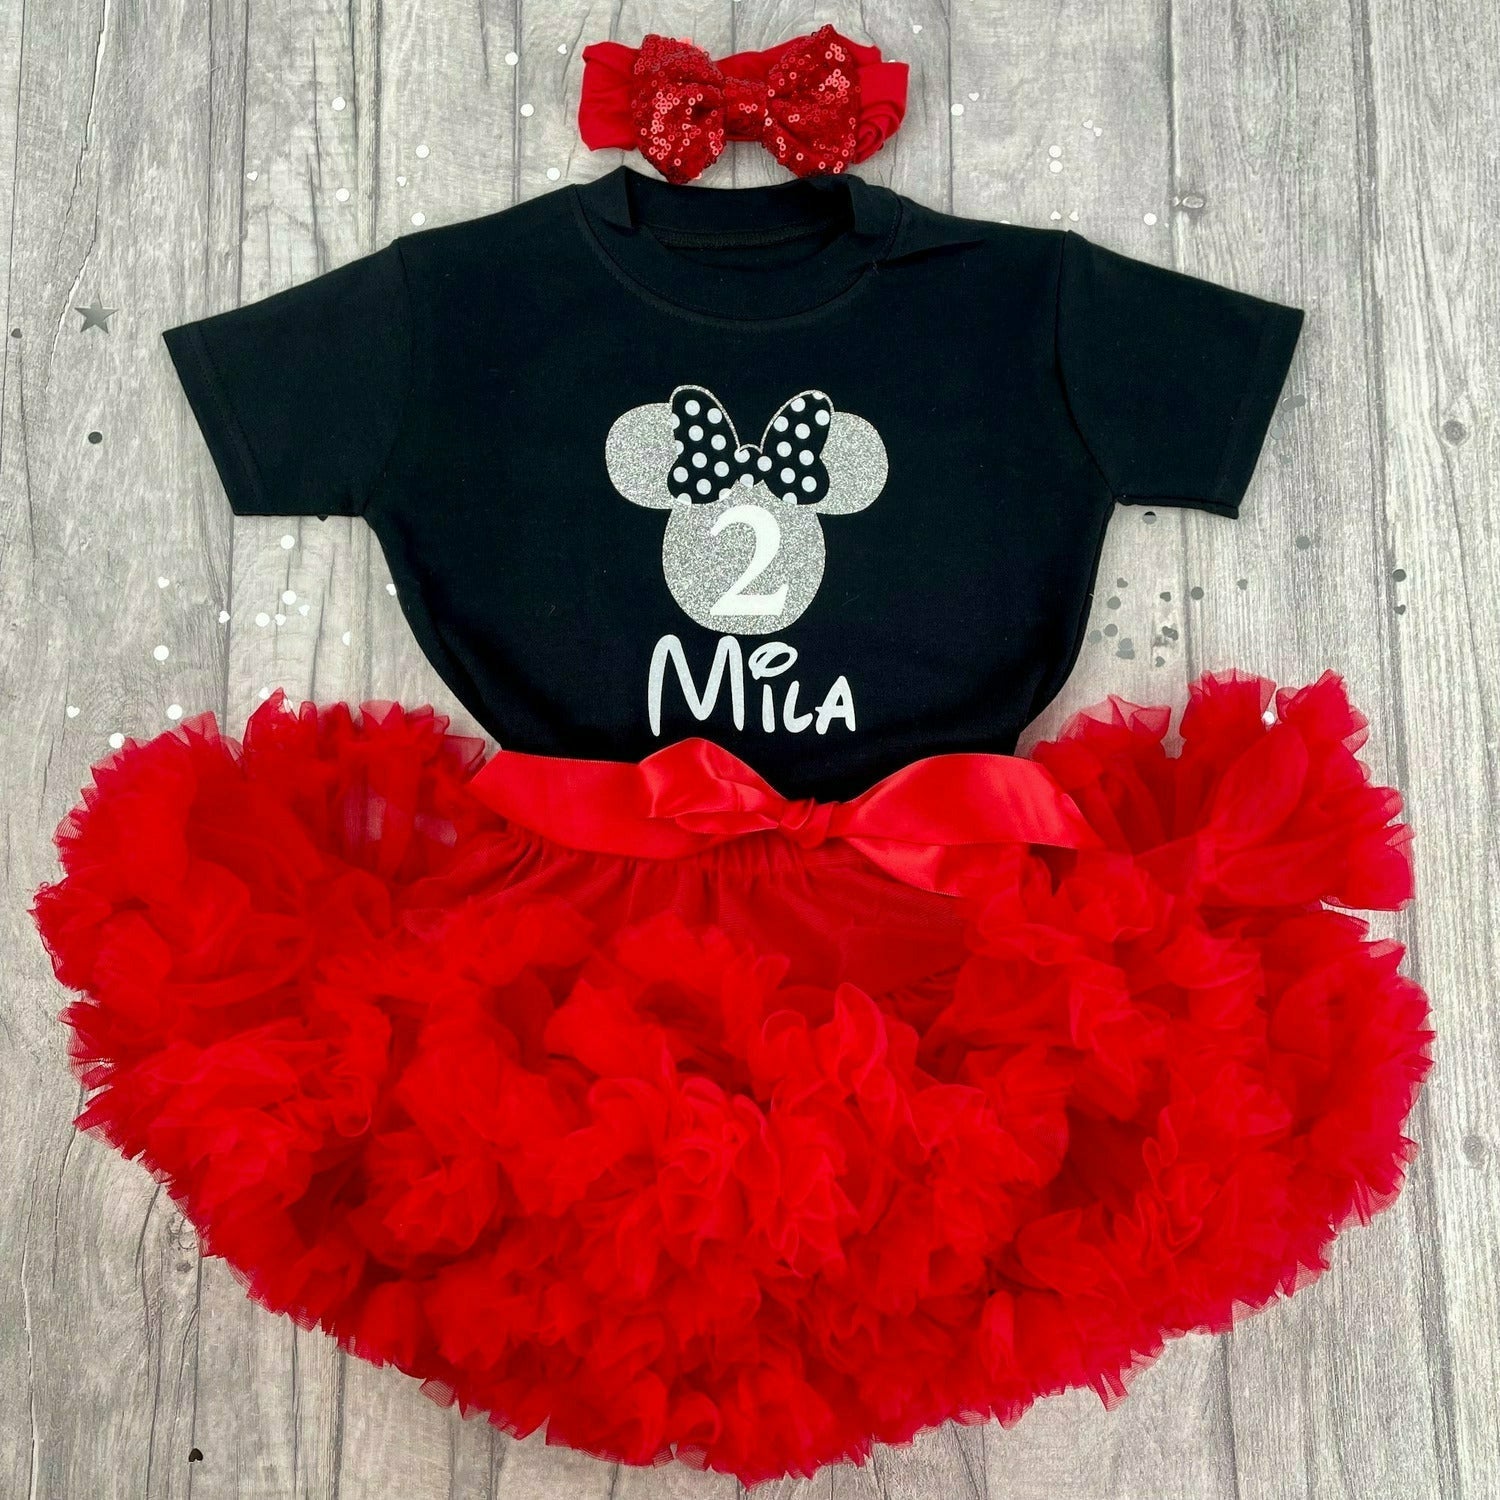 Minnie Mouse Kids' Clothing & Accessories for sale in Algiers